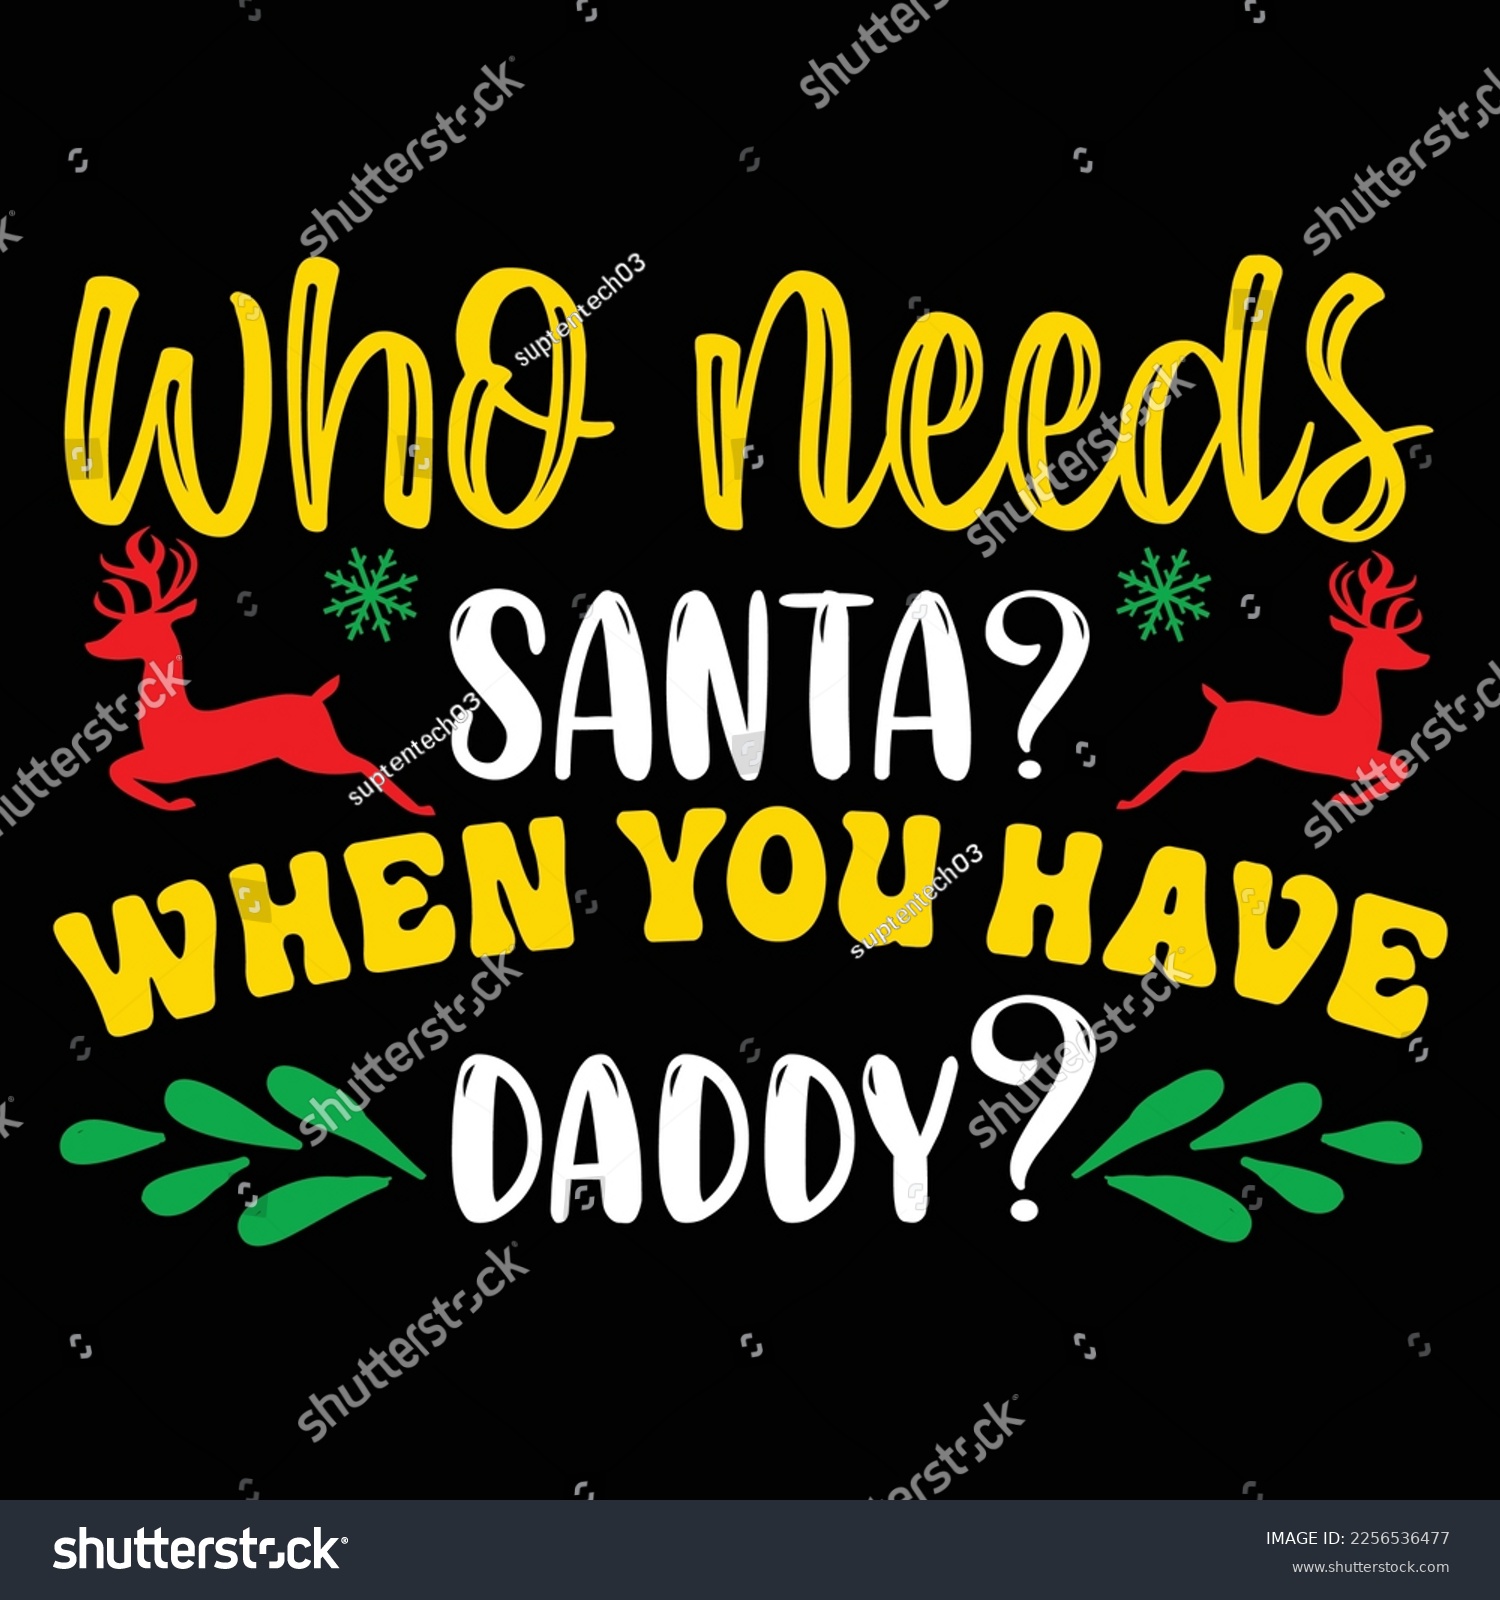 SVG of Who Needs Santa When You Have Daddy, Merry Christmas shirts Print Template, Xmas Ugly Snow Santa Clouse New Year Holiday Candy Santa Hat vector illustration for Christmas hand lettered svg